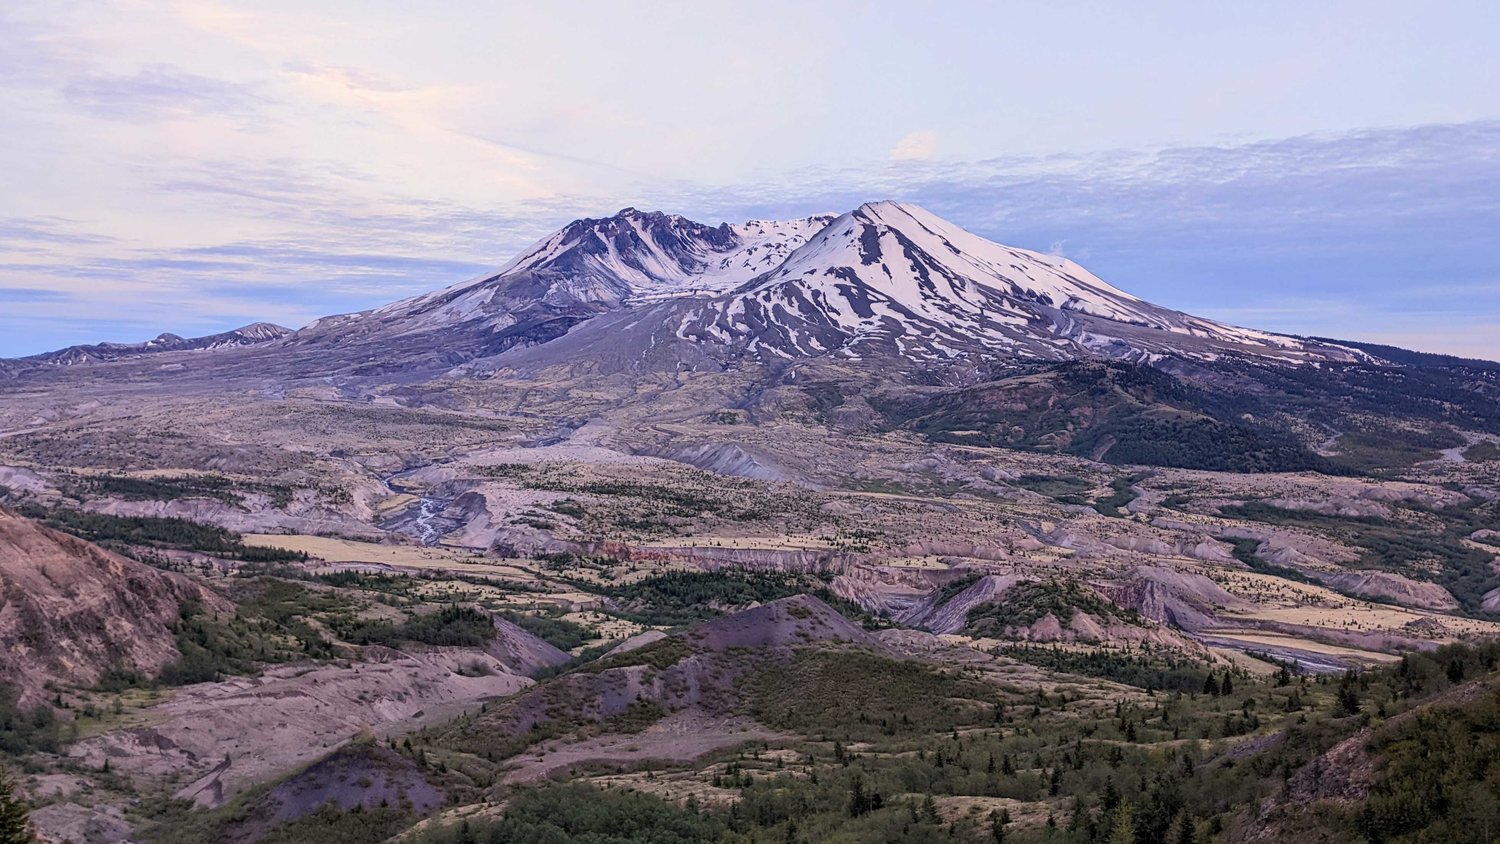 Mount St. Helens towers over the horizon at sunset.